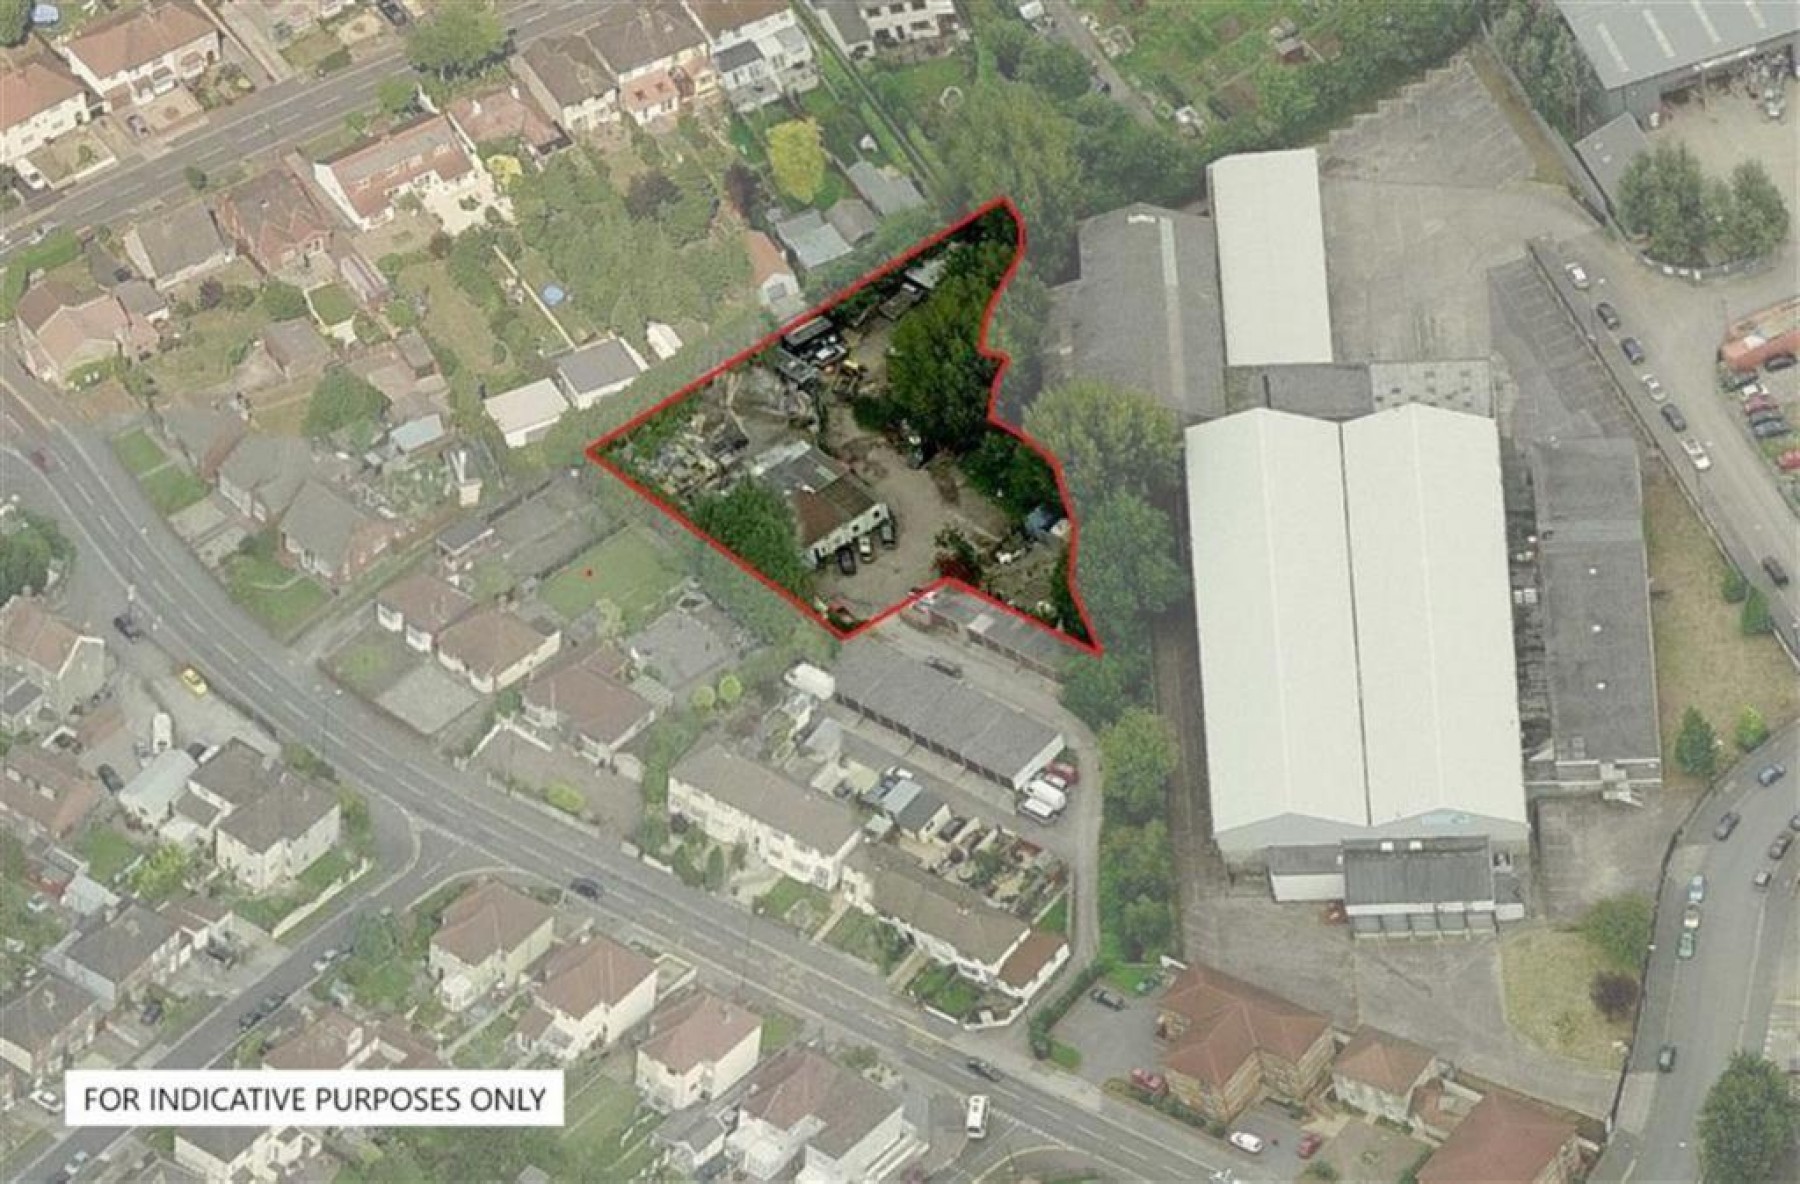 Images for CHURCHES YARD - COMMERCIAL INVESTMENT / RESI DEVELOPMENT